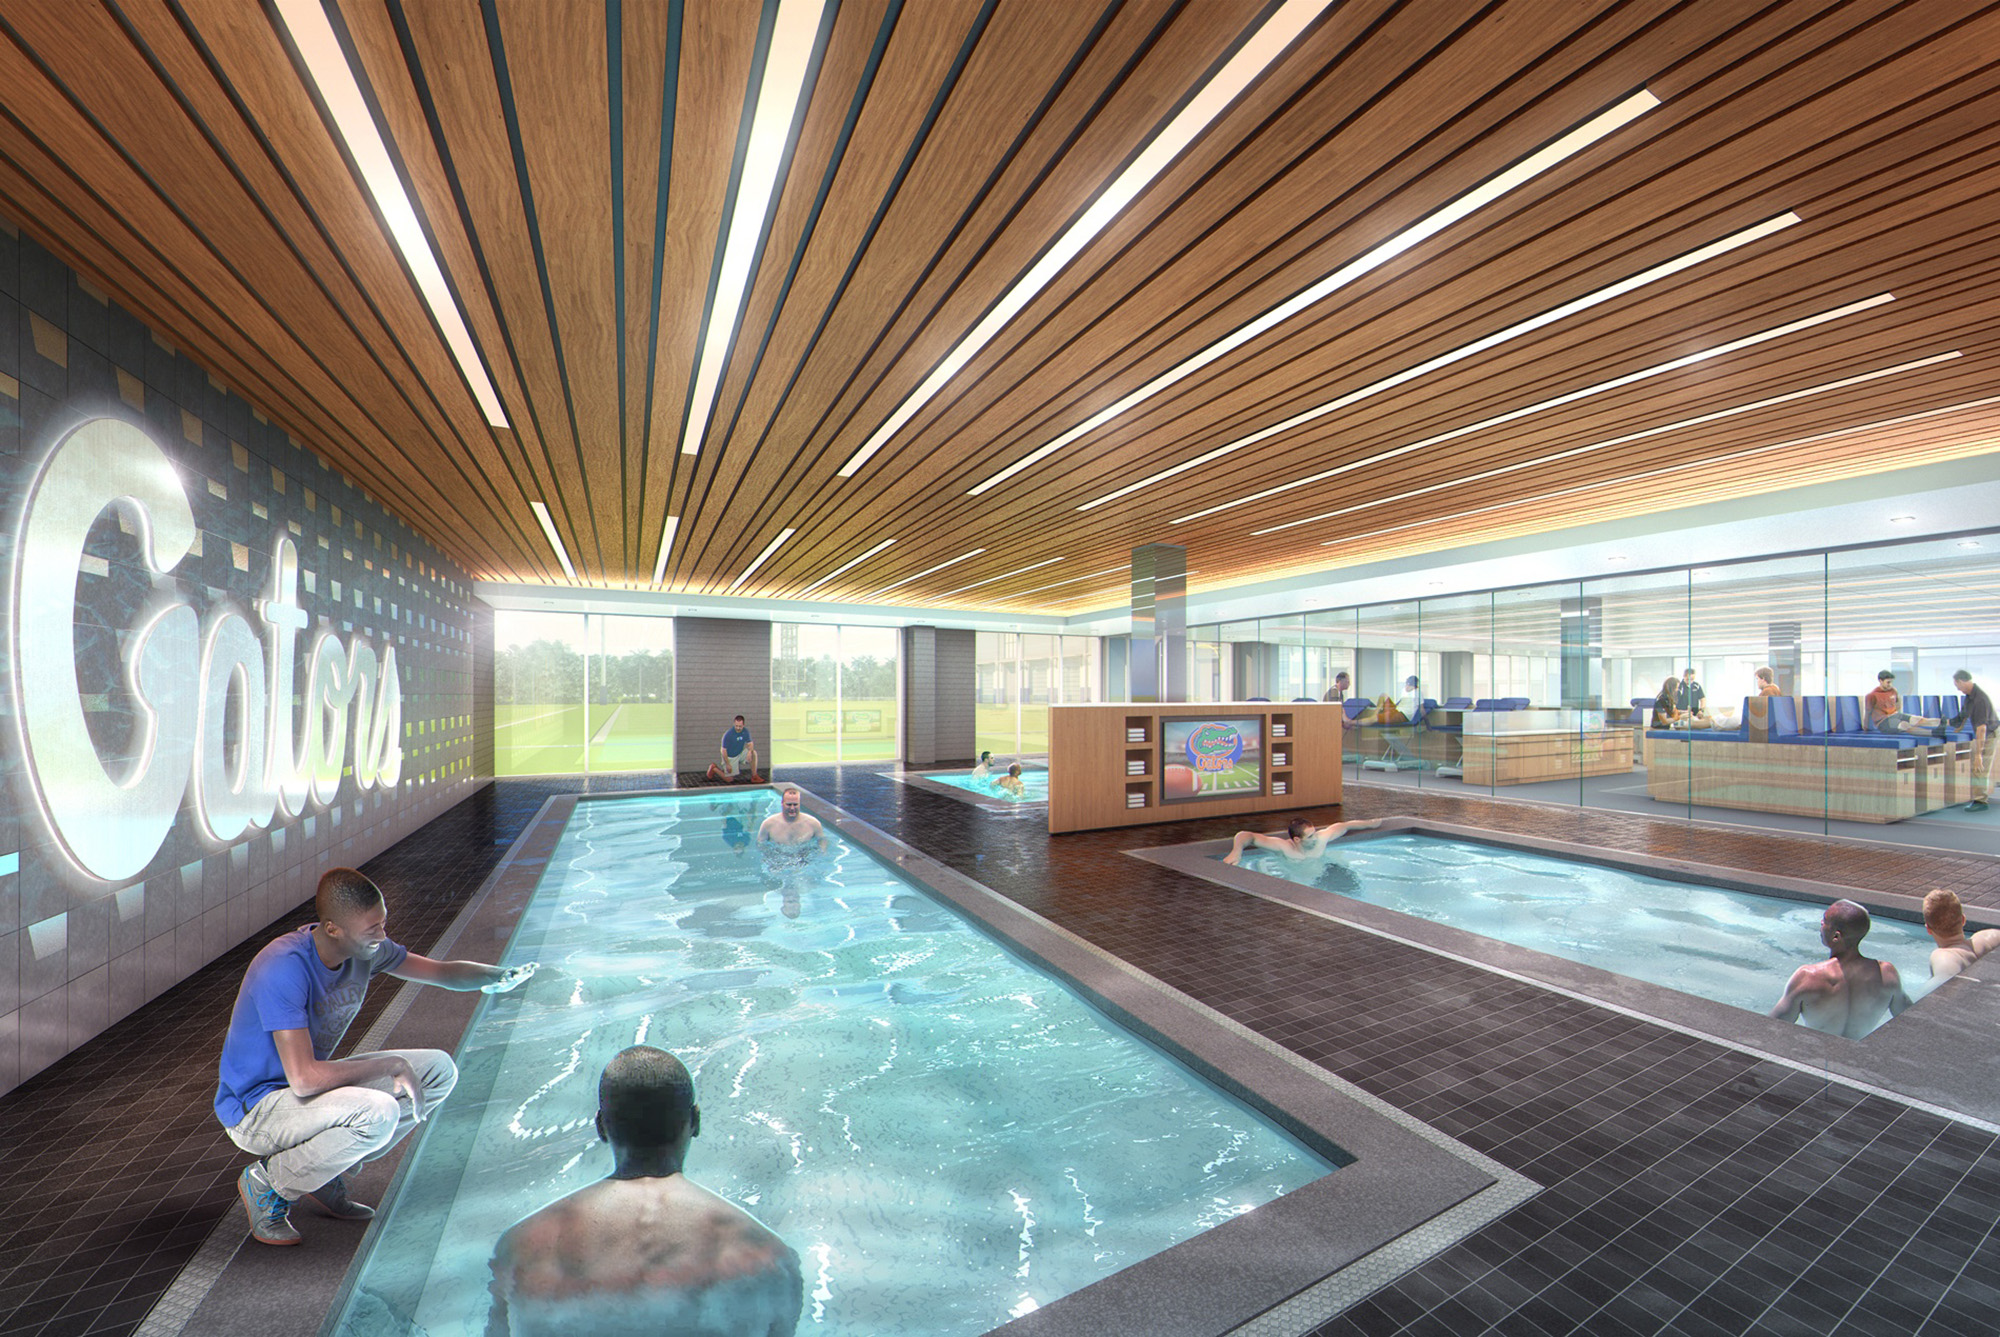 Rendering of the hydrotherapy room at the James W. “Bill” Heavener Football Training Center at the University of Florida in Gainesville